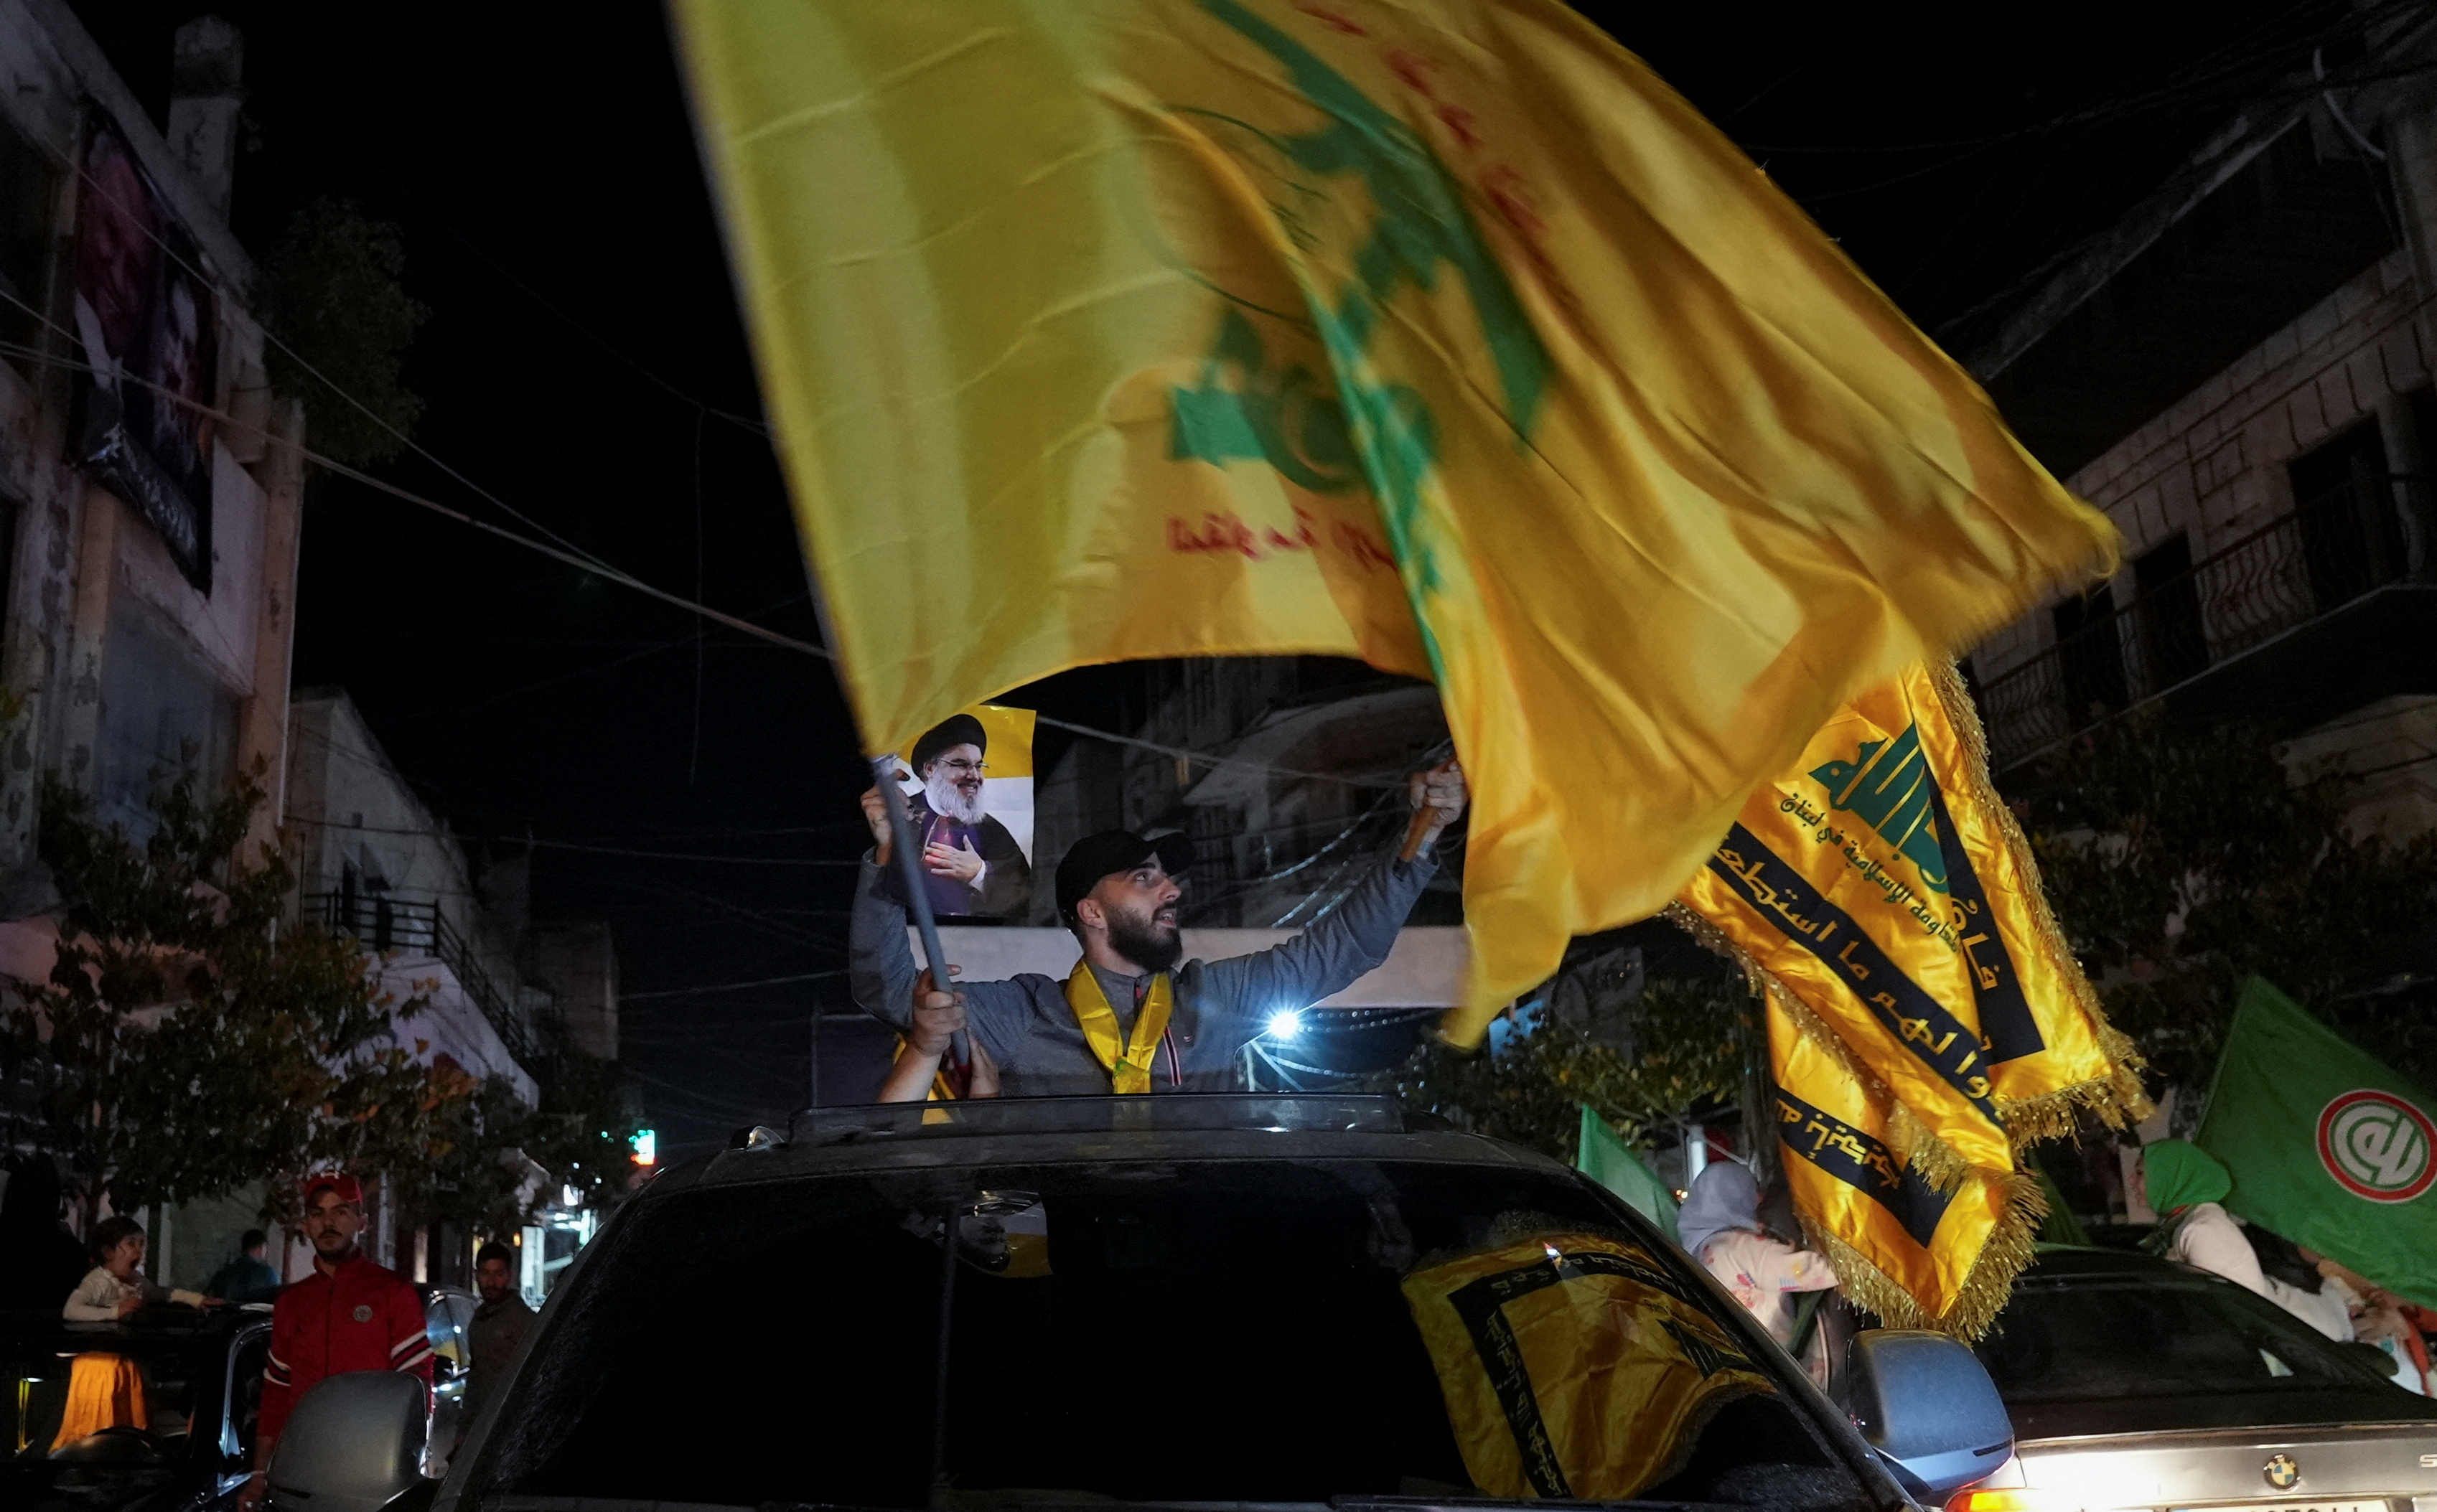 Supporters of Lebanon's Hezbollah leader carry flags while riding in a convoy, in Nabatiyeh